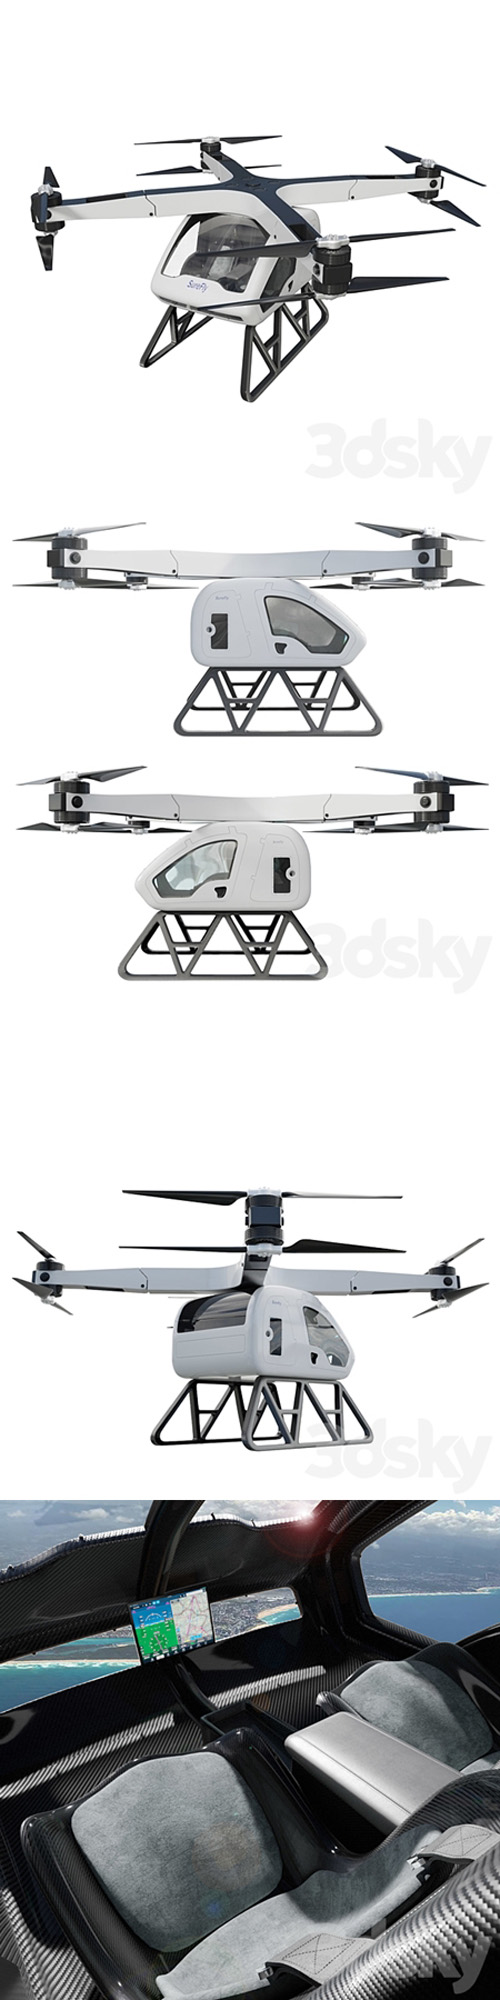 Workhorse Surefly Air taxi 3D Model